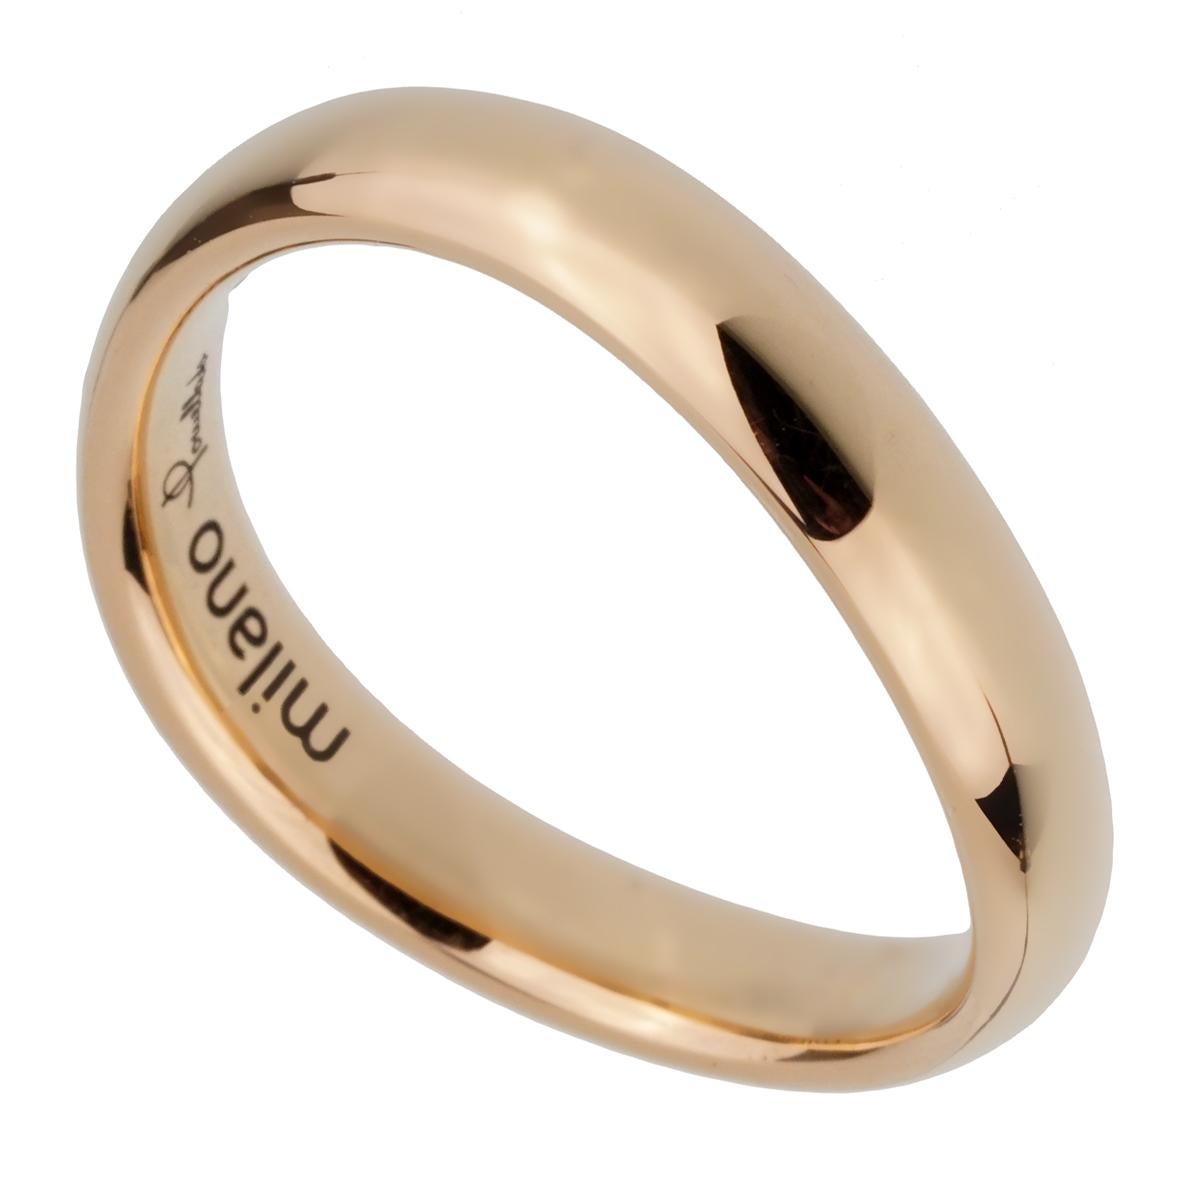 A chic Pomellato wave style band crafted in 18k rose gold, the ring measures a size 5 and can be resized.

Pomellato Retail Price: $1200
Sku: 2395